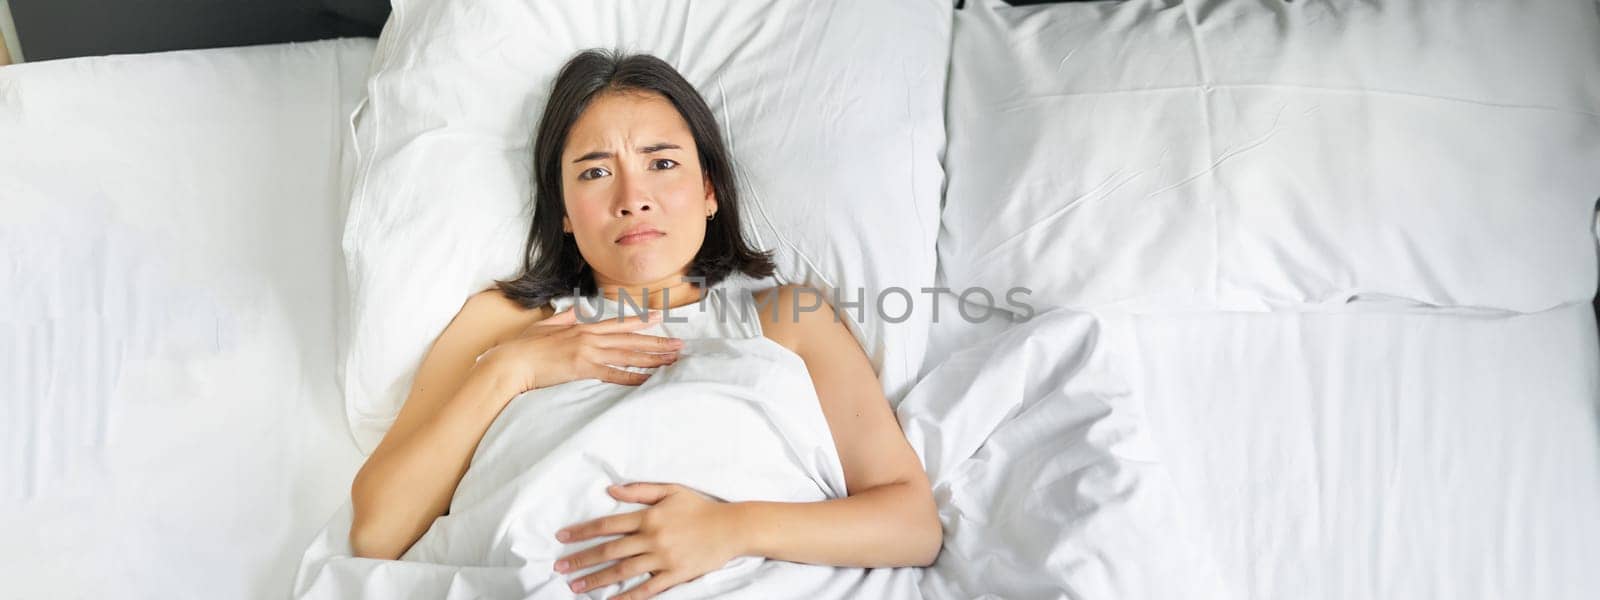 Portrait of sad young asian woman lying in bed, overthinking before going to sleep, stay late because of insomnia, frowning and looking frustrated.